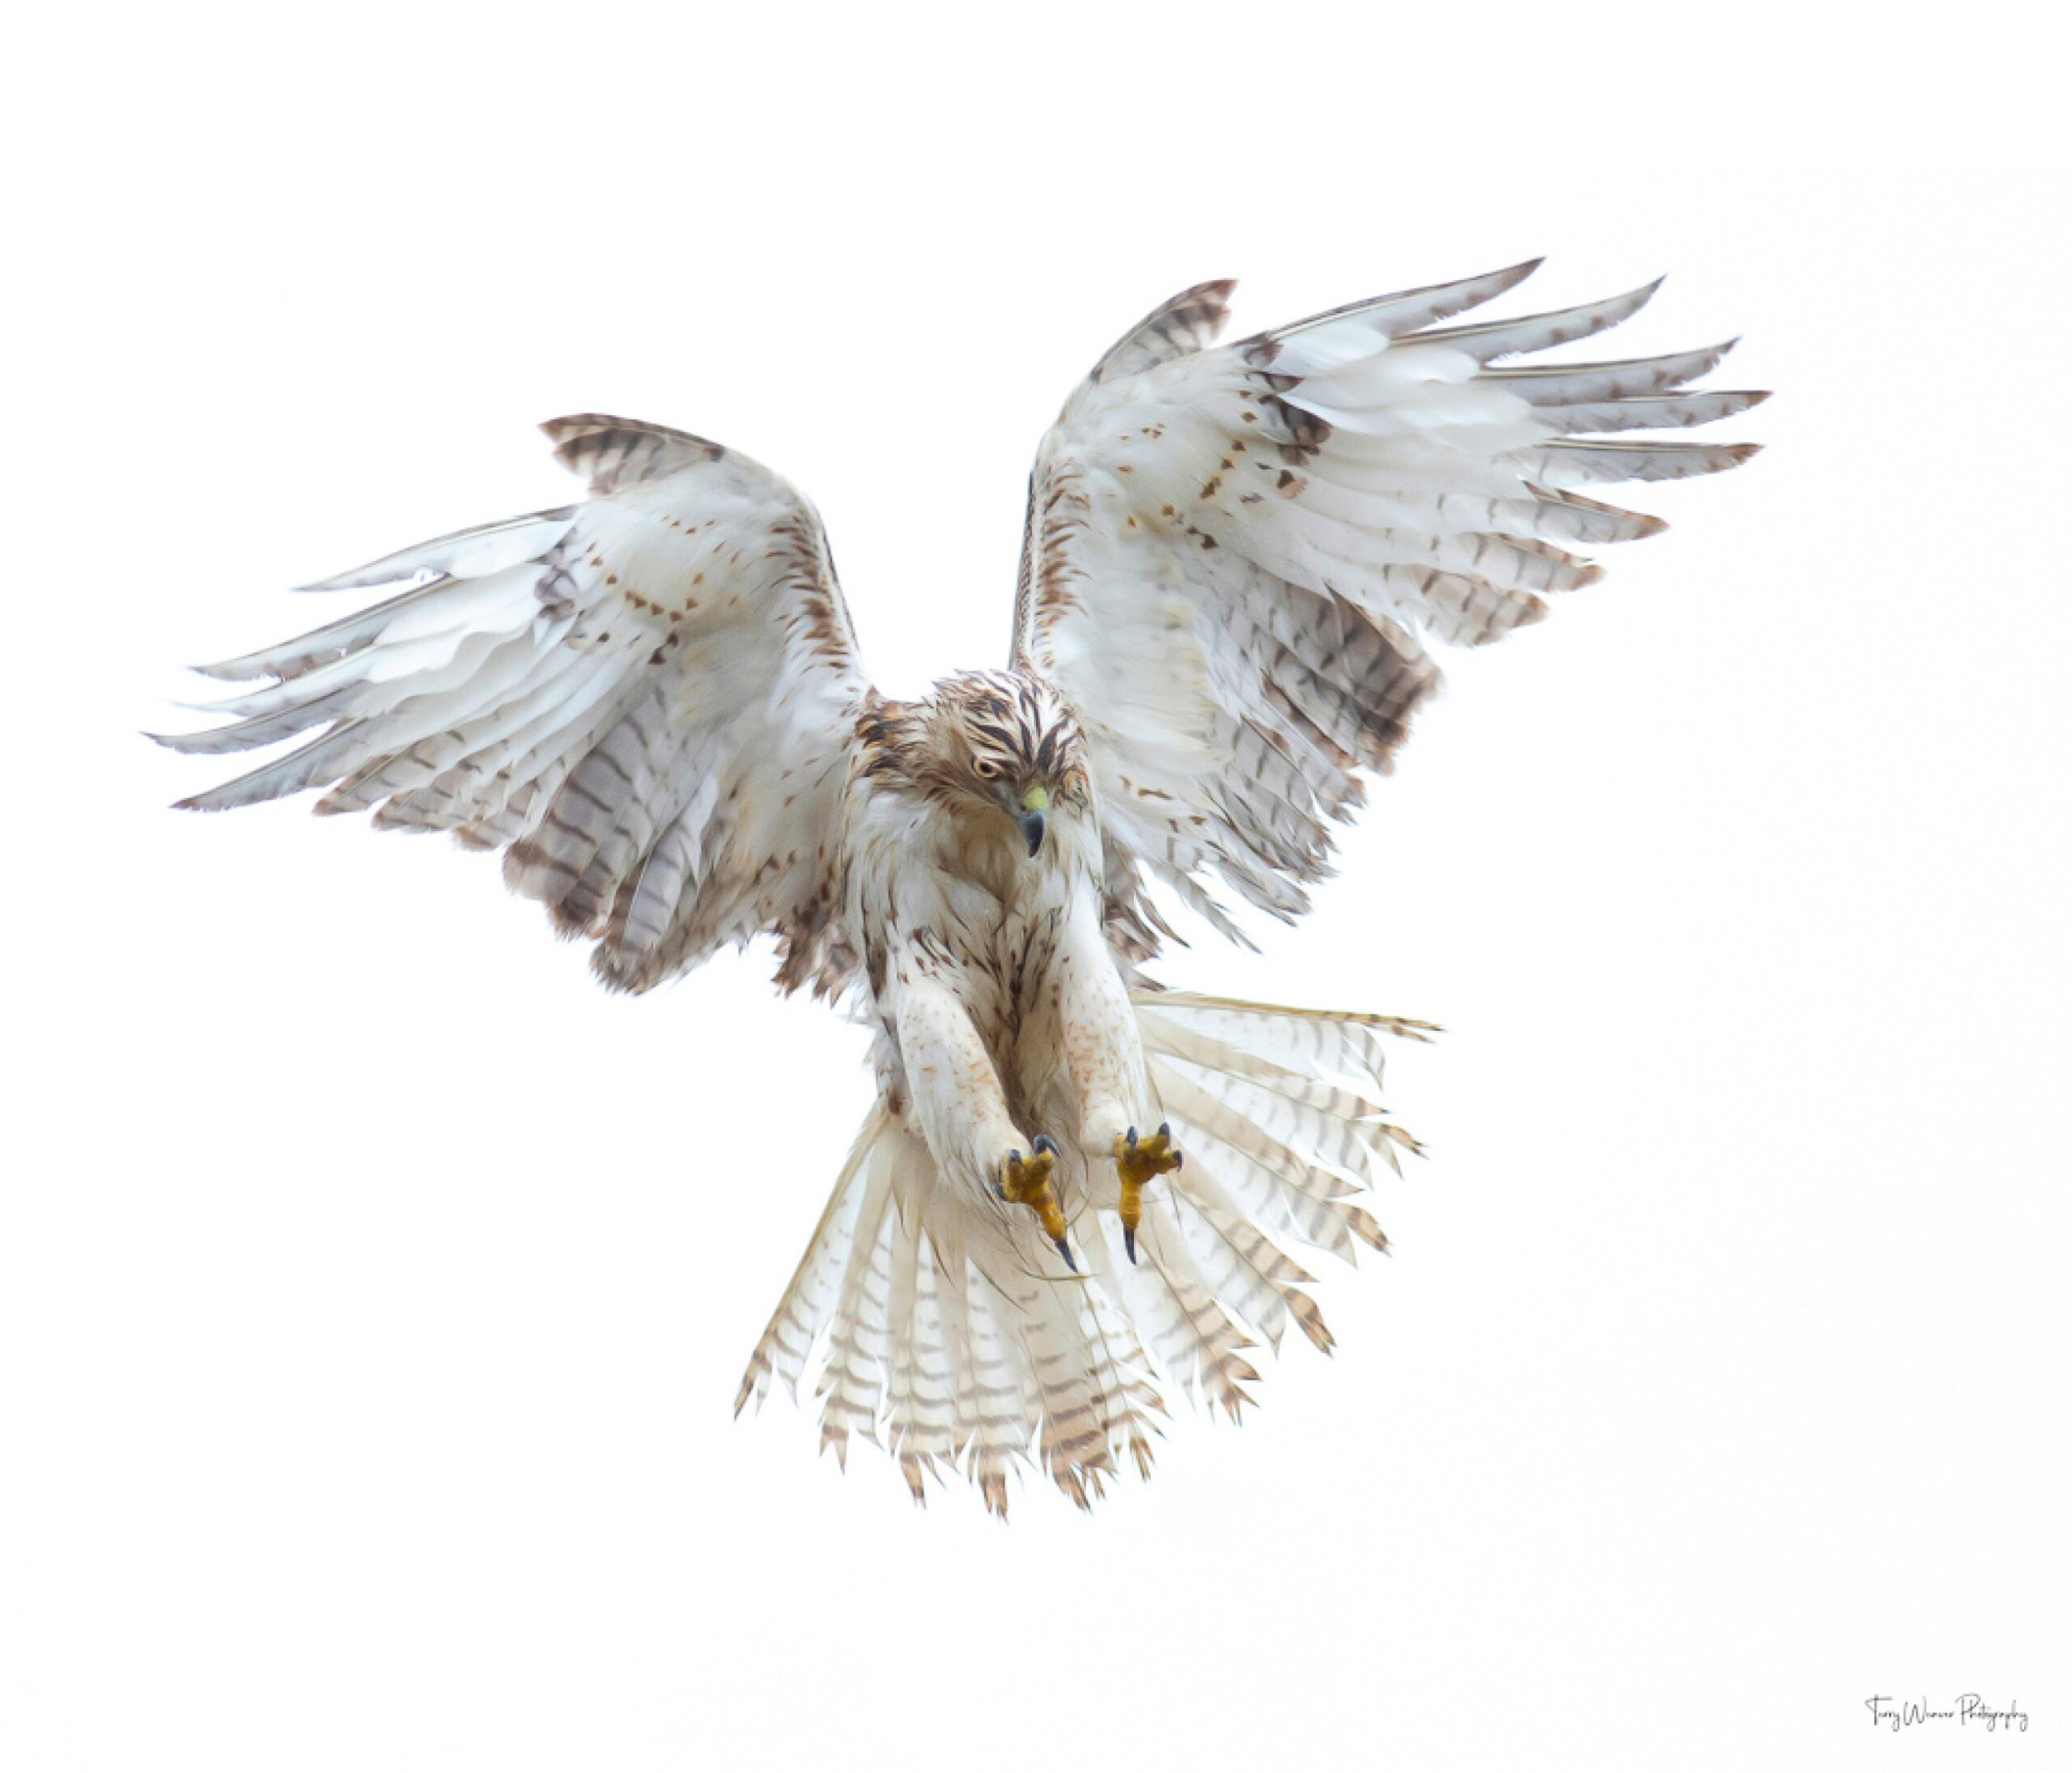 People's Choice winning photo, "Angel Hawk" by Terry Weaver. Photo features the underside of a hawk with wings spread, coming down for a landing.